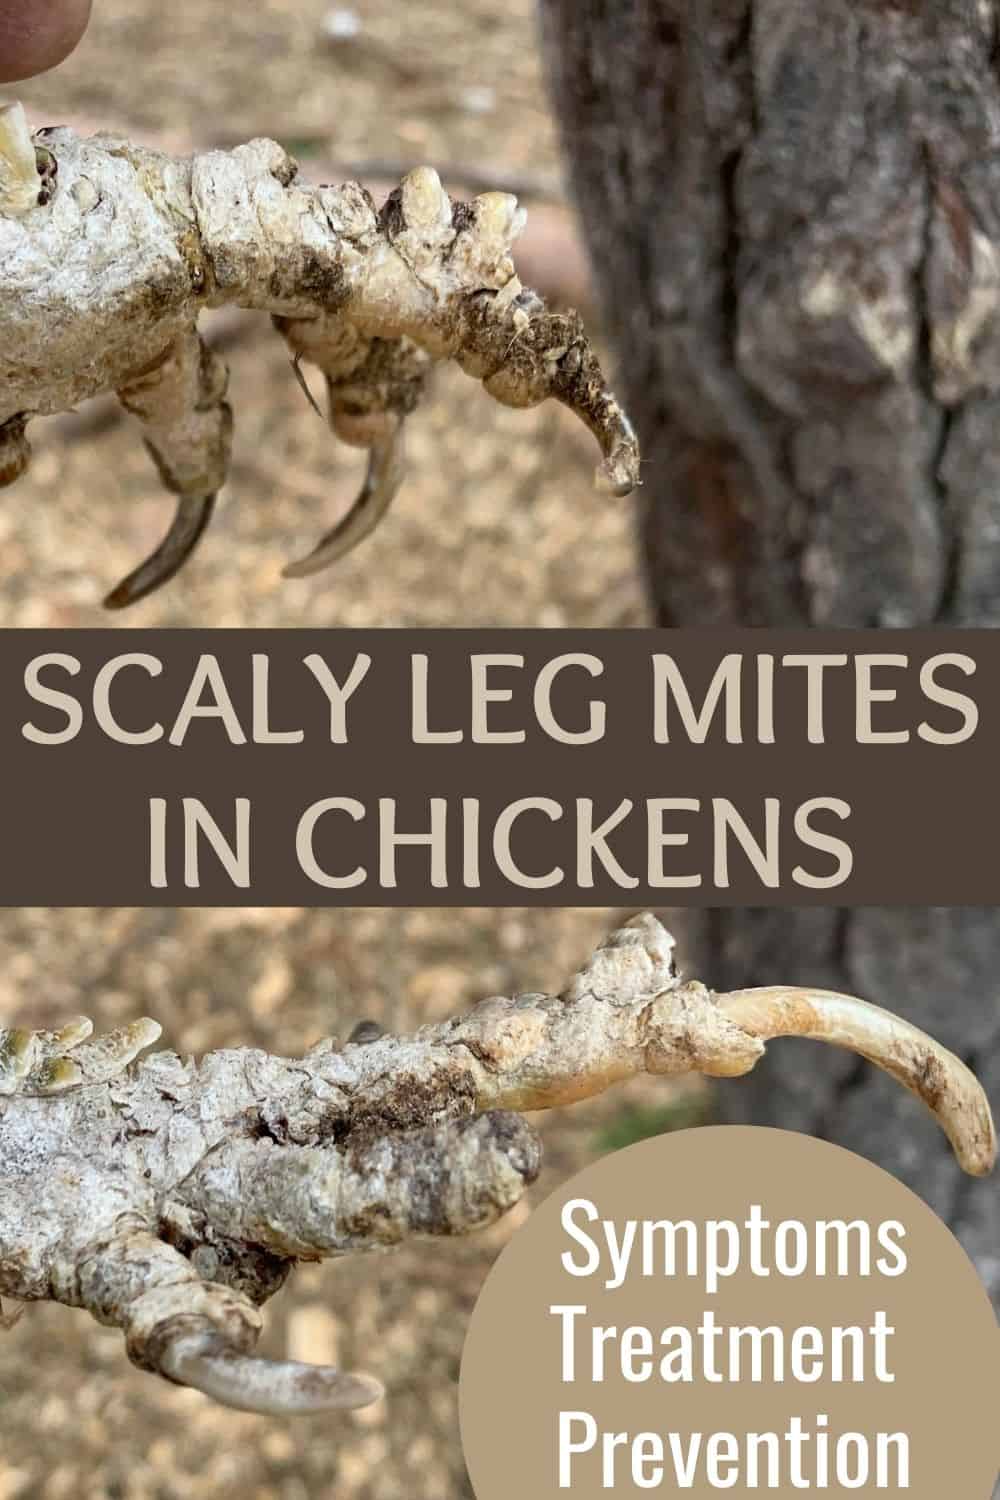 scaly leg mites in chickens: symptoms, treatment, prevention